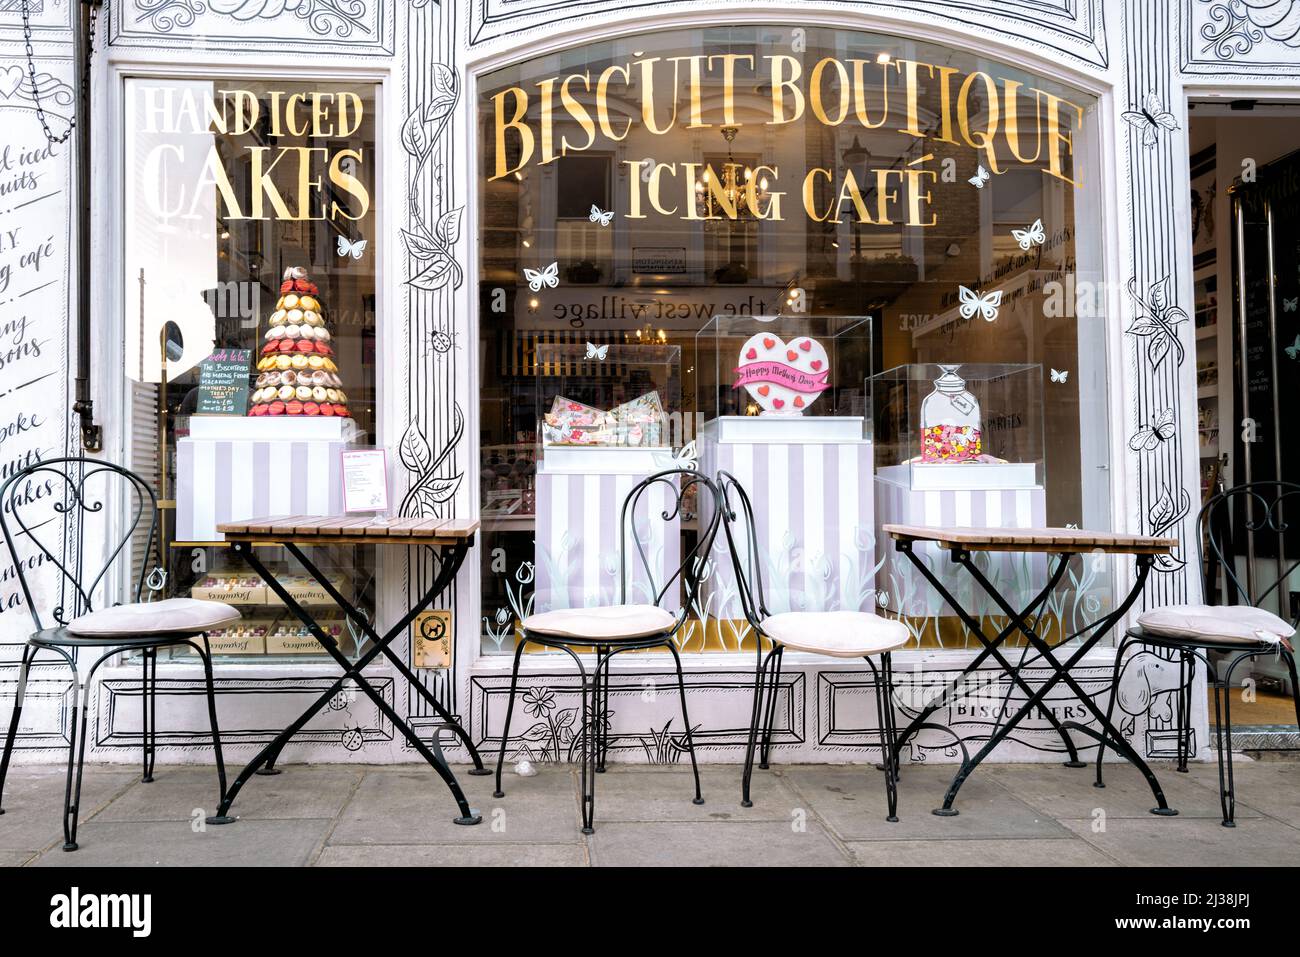 London, UK - 24 March 2022: The quaint Biscuit Boutique and Icing Cafe, Notting Hill, London. An upmarket bisuiteers in Notting Hill, selling sweet tr Stock Photo